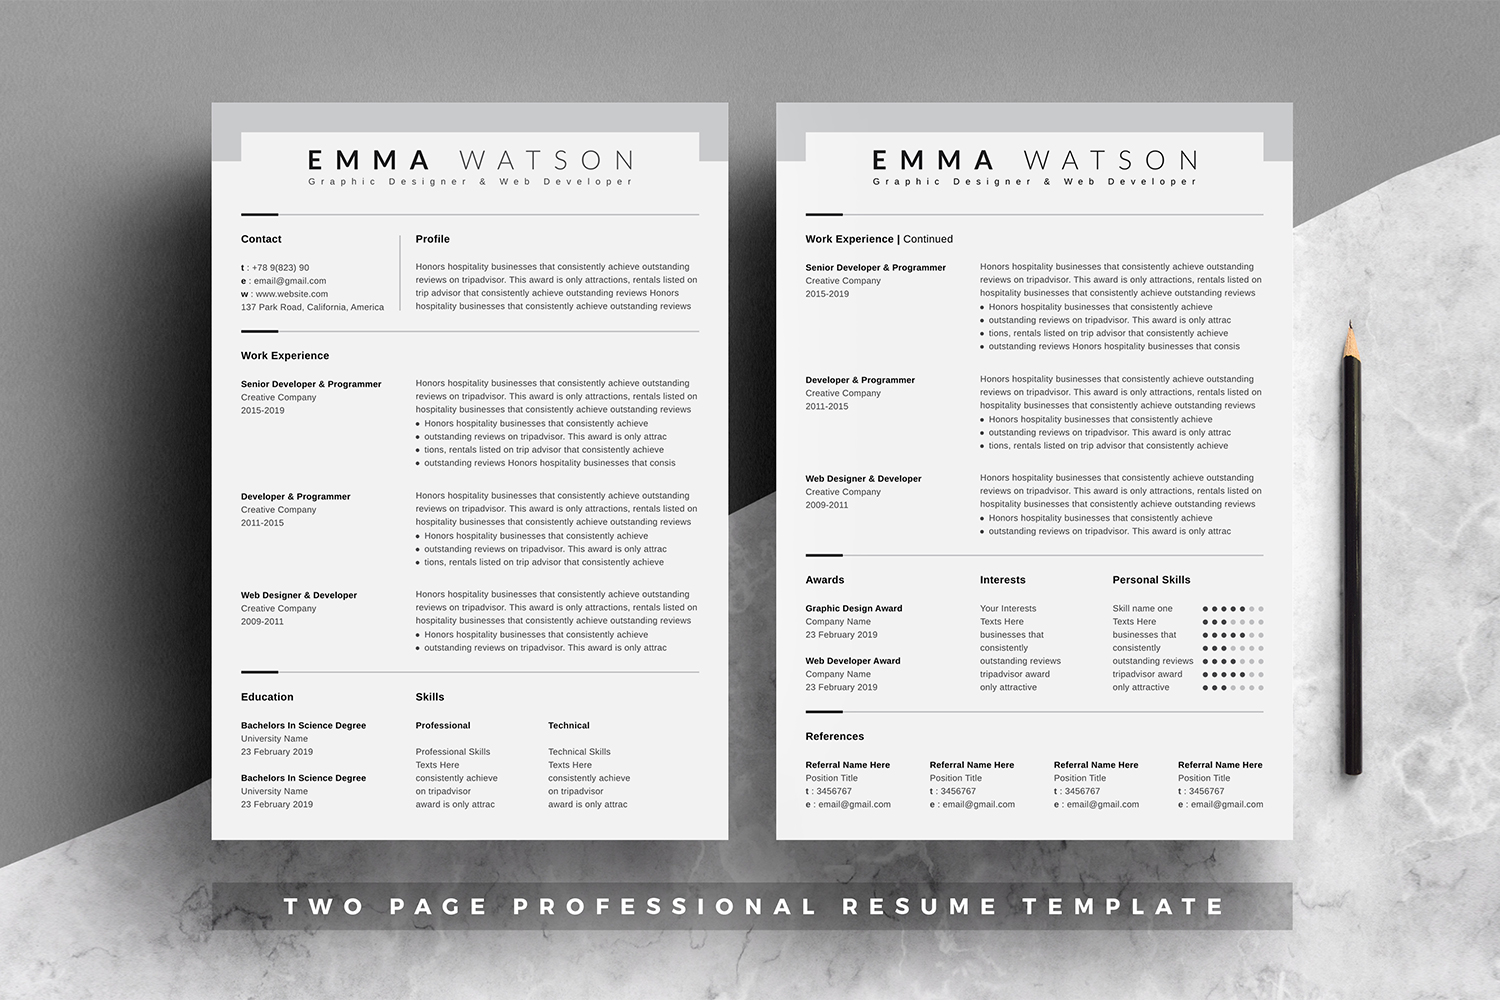 Emma Watson Resume Template With Cover Letter